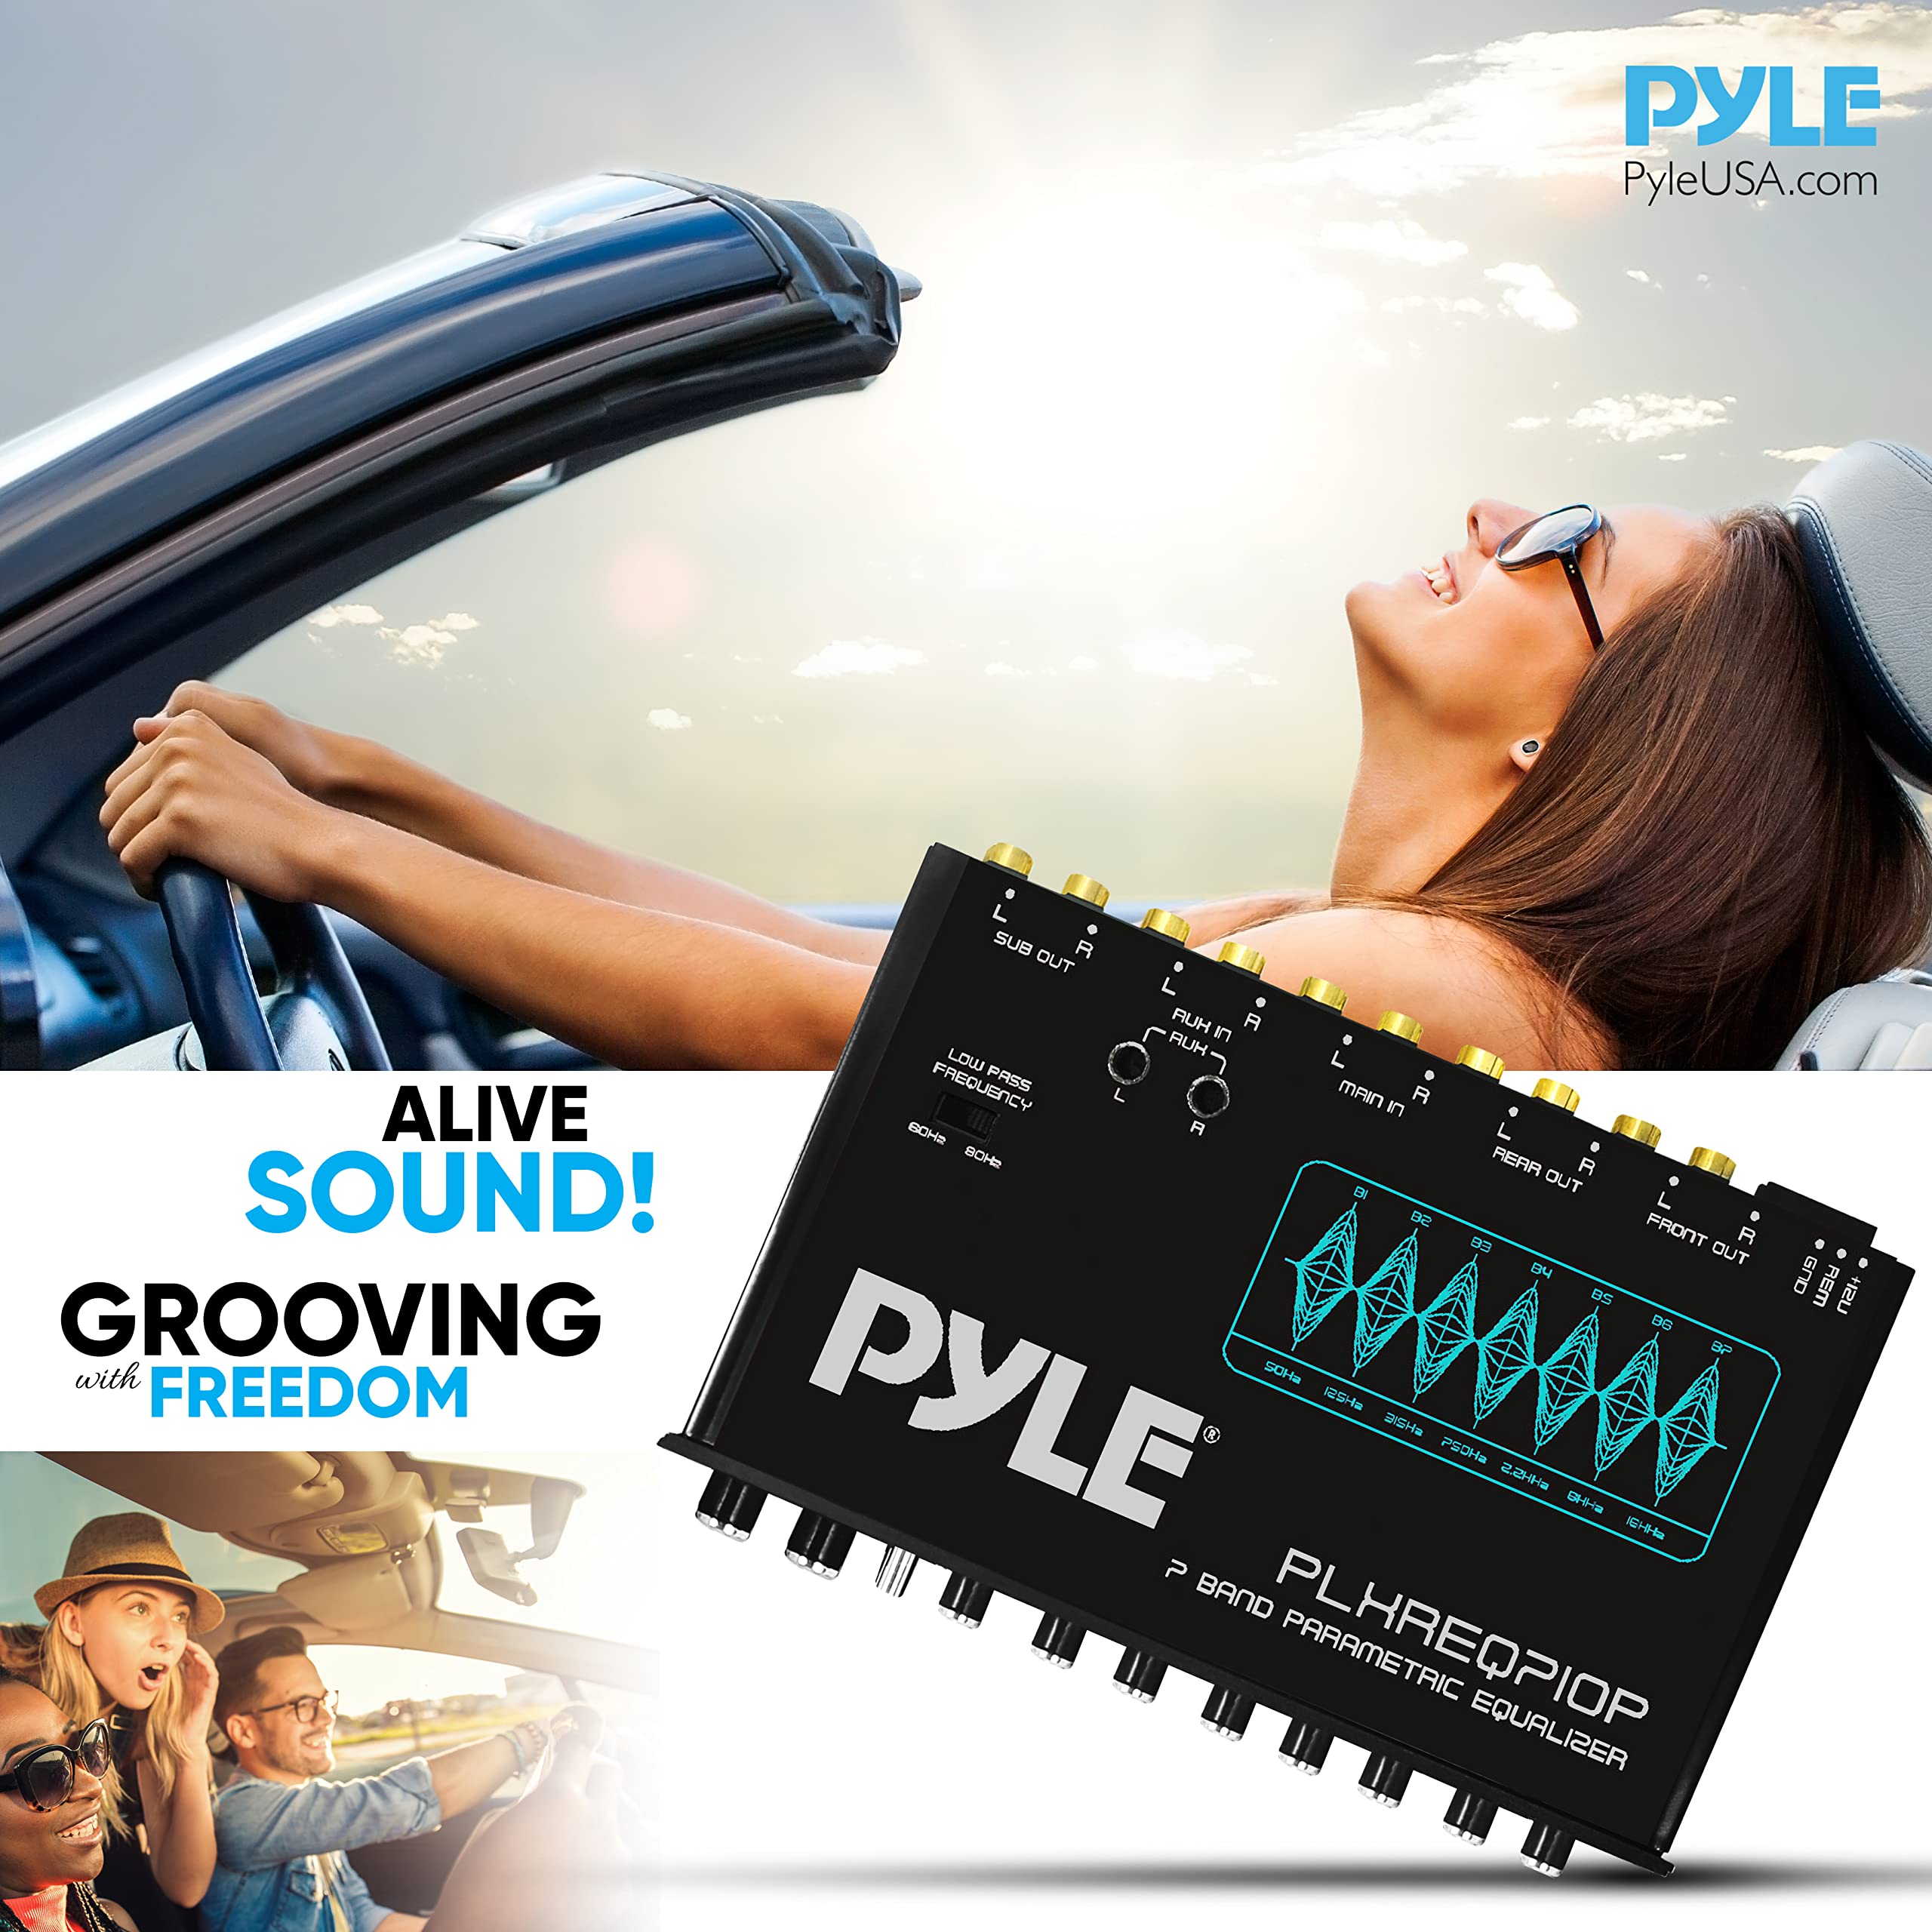 Pyle 7 Band Parametric Equalizer - 7 Volt RMS Pre-Amp Output with Subwoofer Gain Control, and 3 Input Sources Selectable, Blue Light Illumination